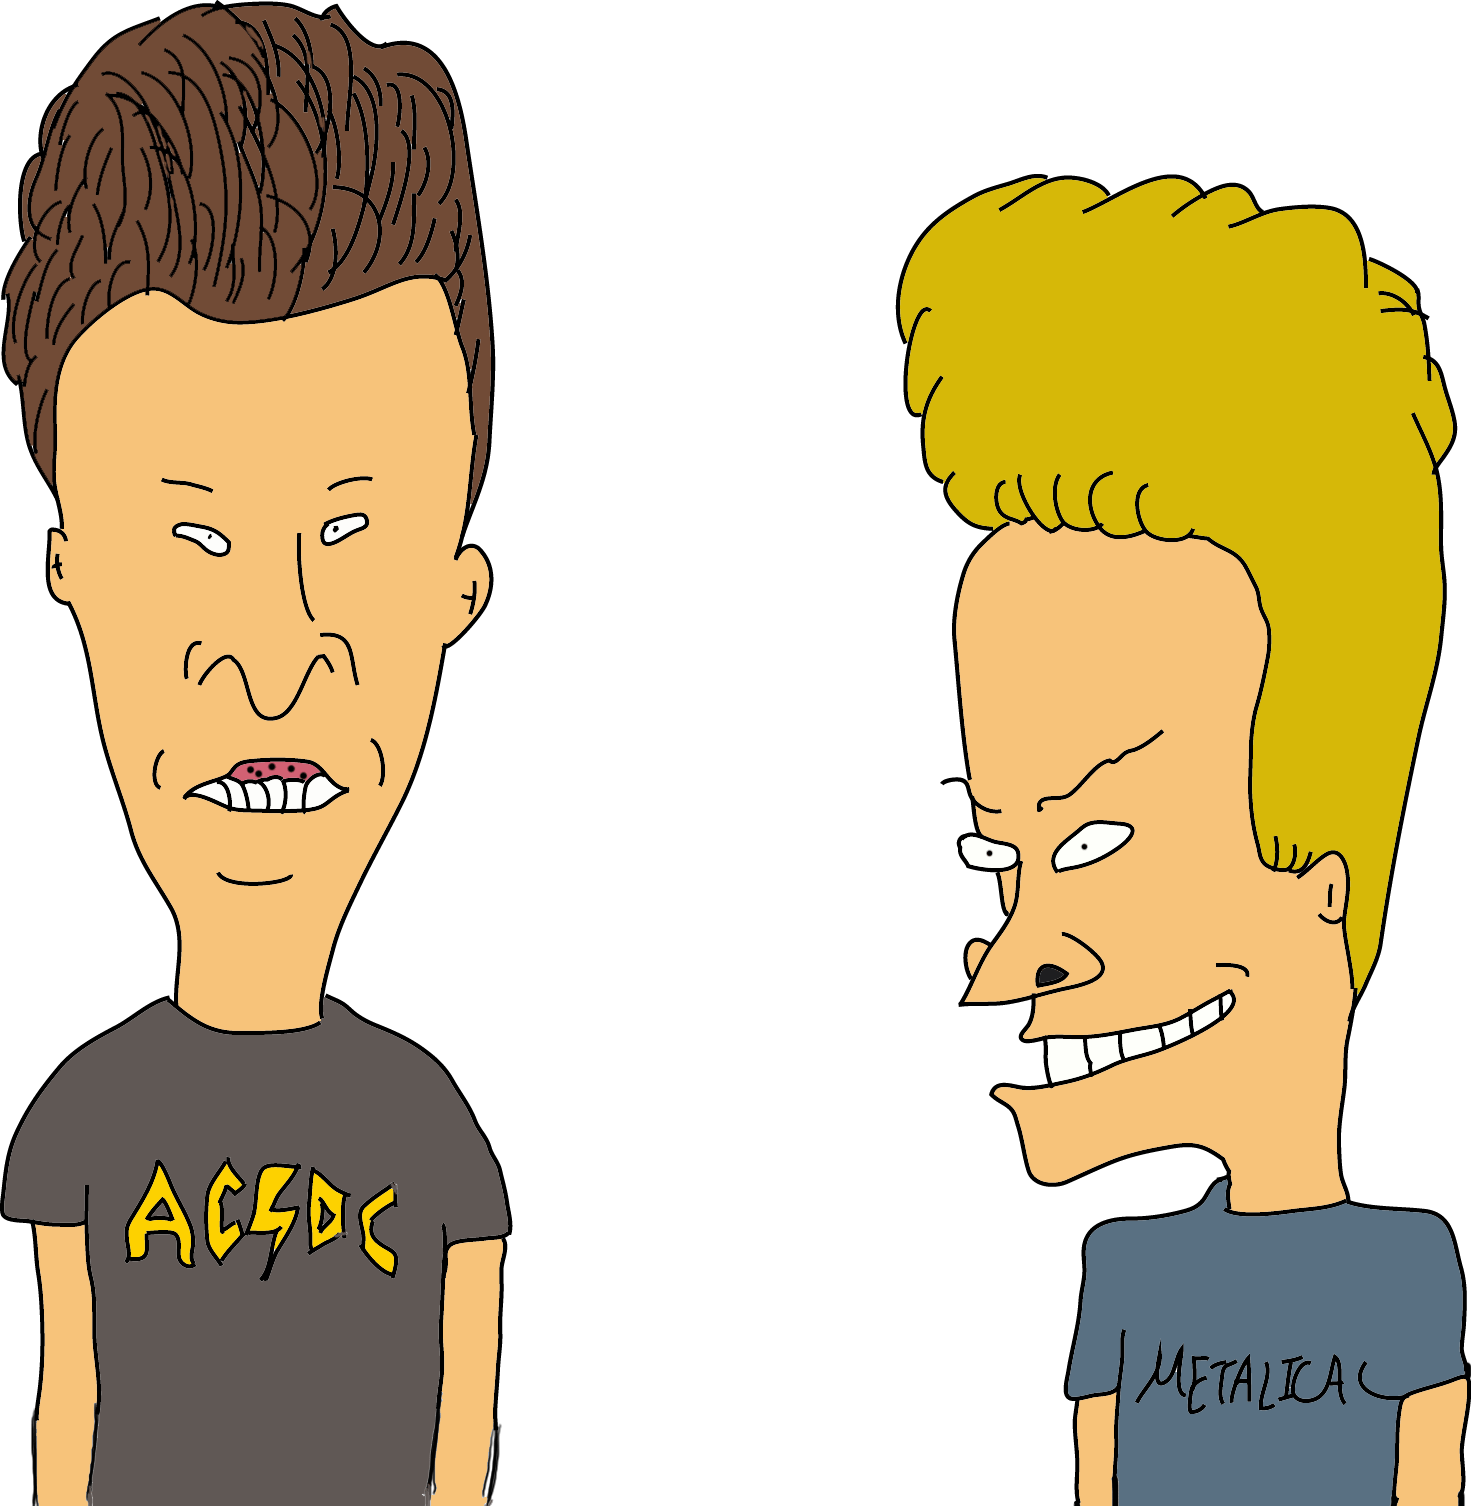 beavis and butthead png 20 free Cliparts Download images on